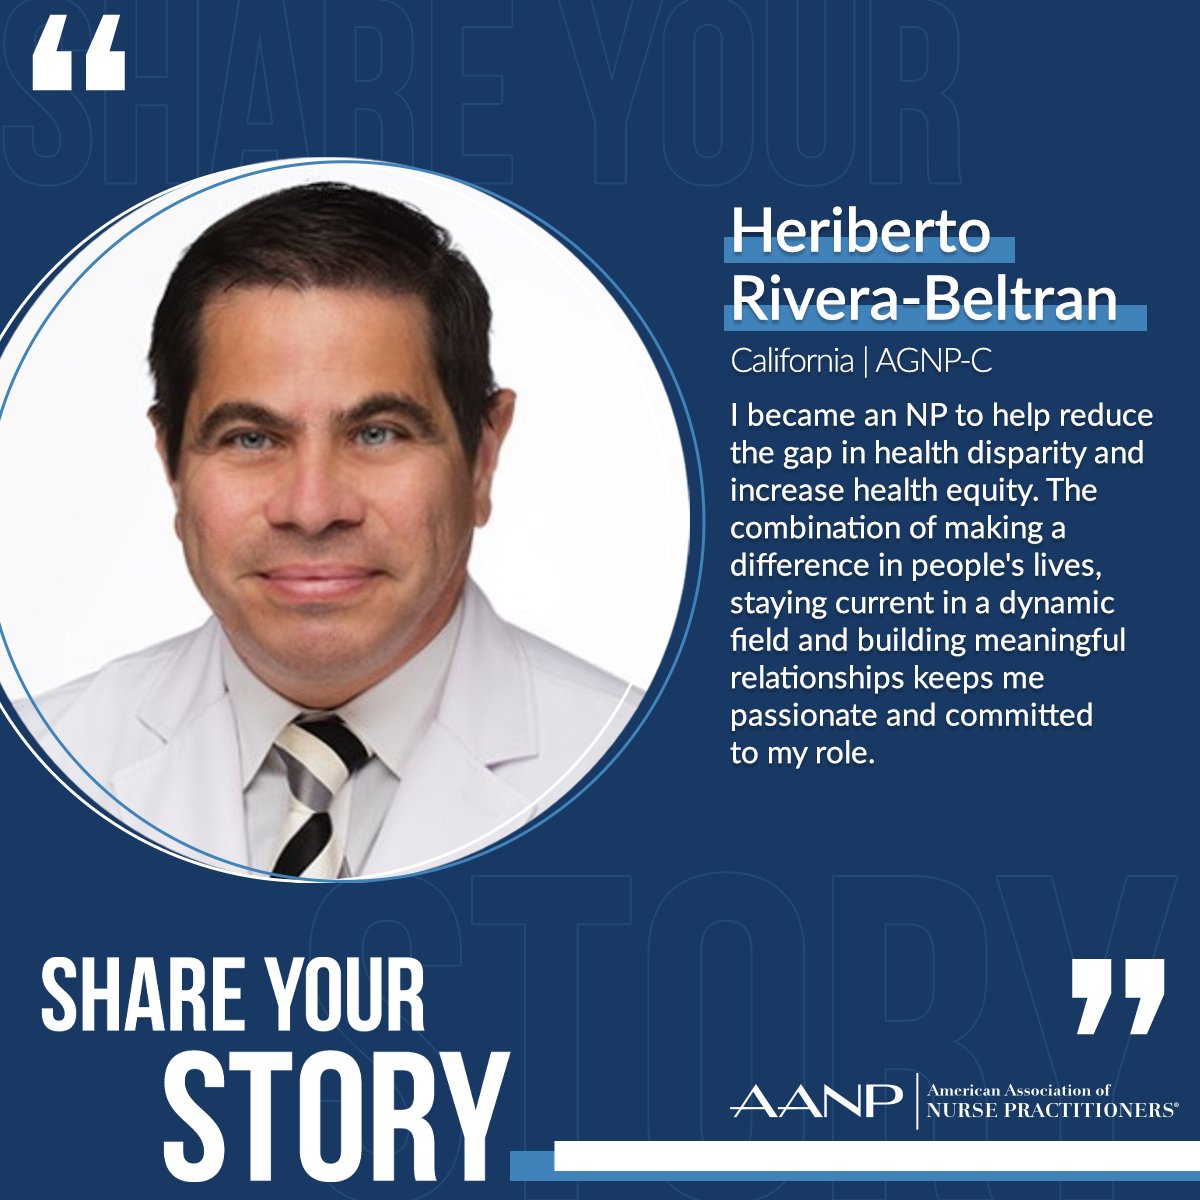 Thank you, Heriberto Rivera-Beltran, for sharing your testimony with AANP! NPs — share your story of leadership, mentorship, resilience or advocacy at aanp.org/shareyourstory. Select stories will be featured on AANP's social media. #NPsLead #ShareYourStory